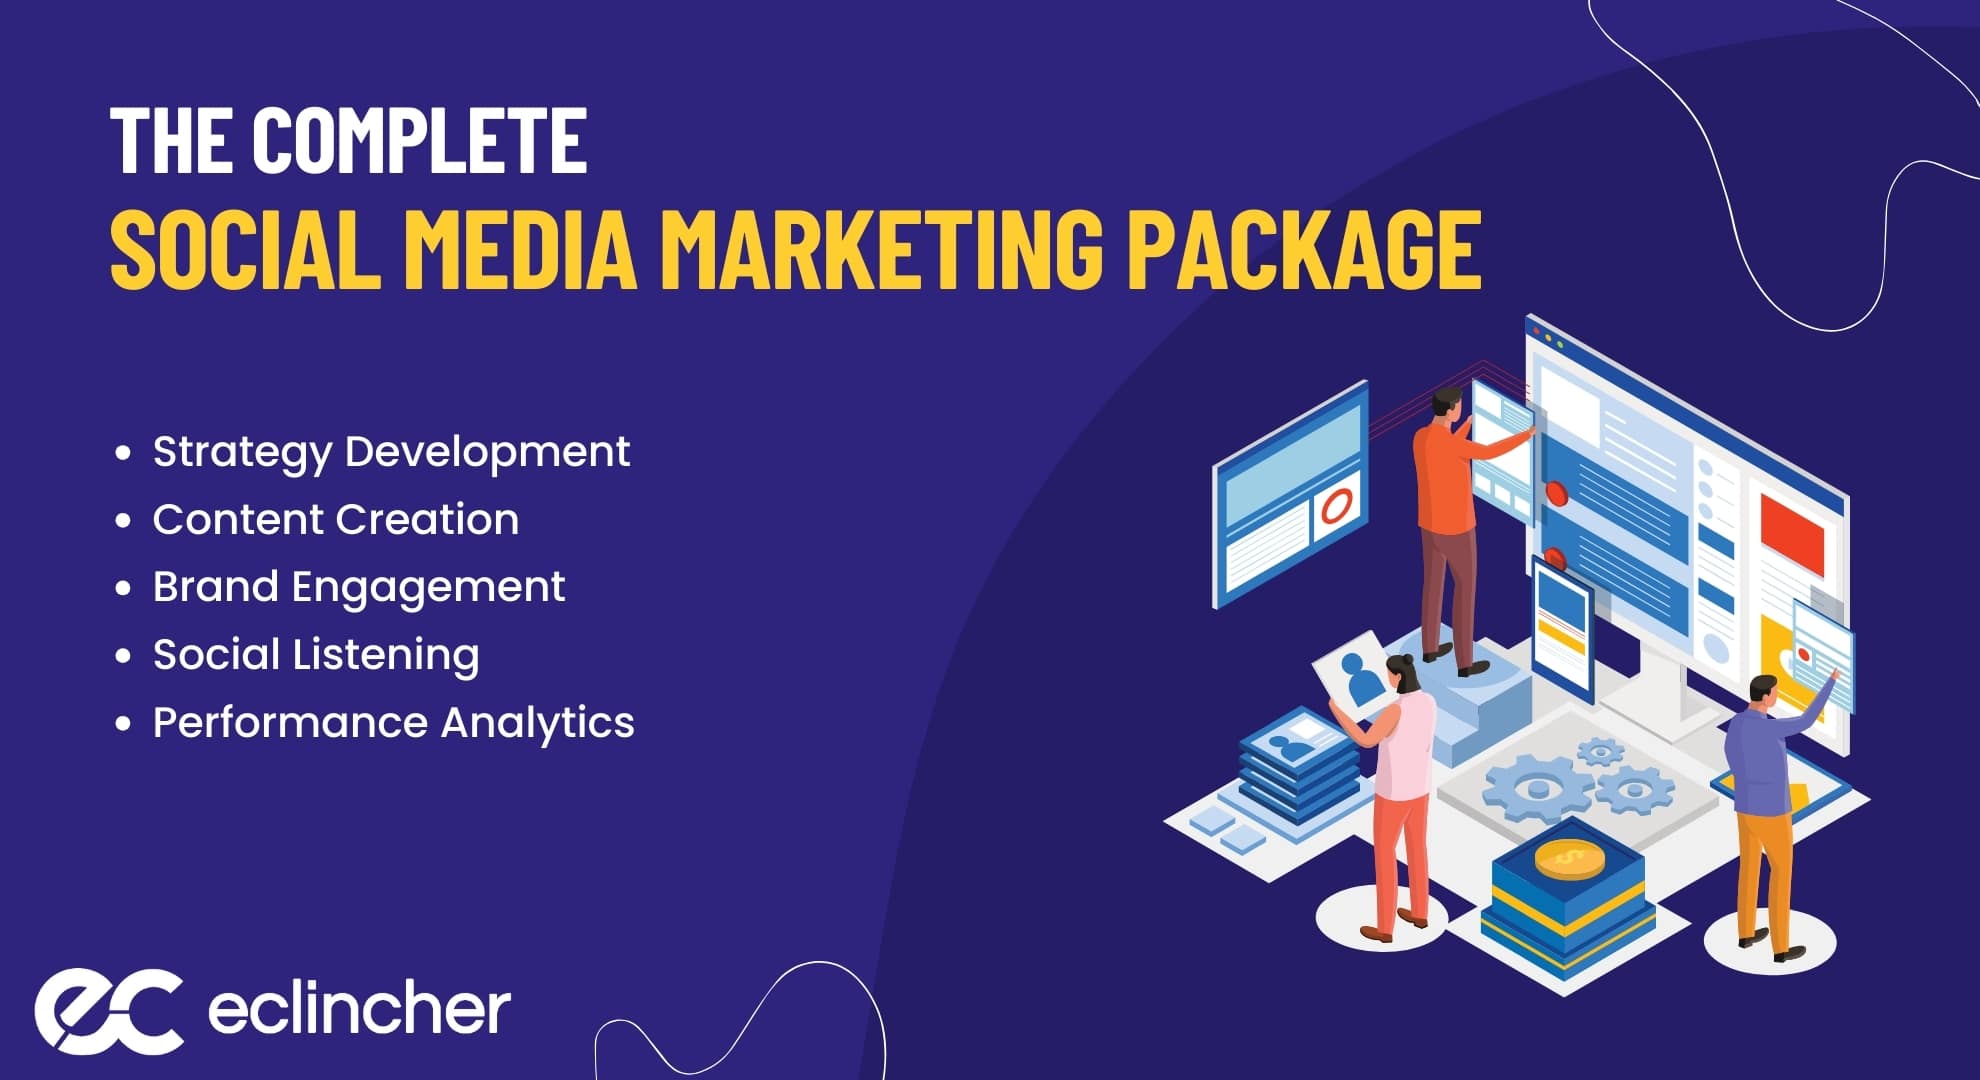 The Complete Social Media Marketing Package